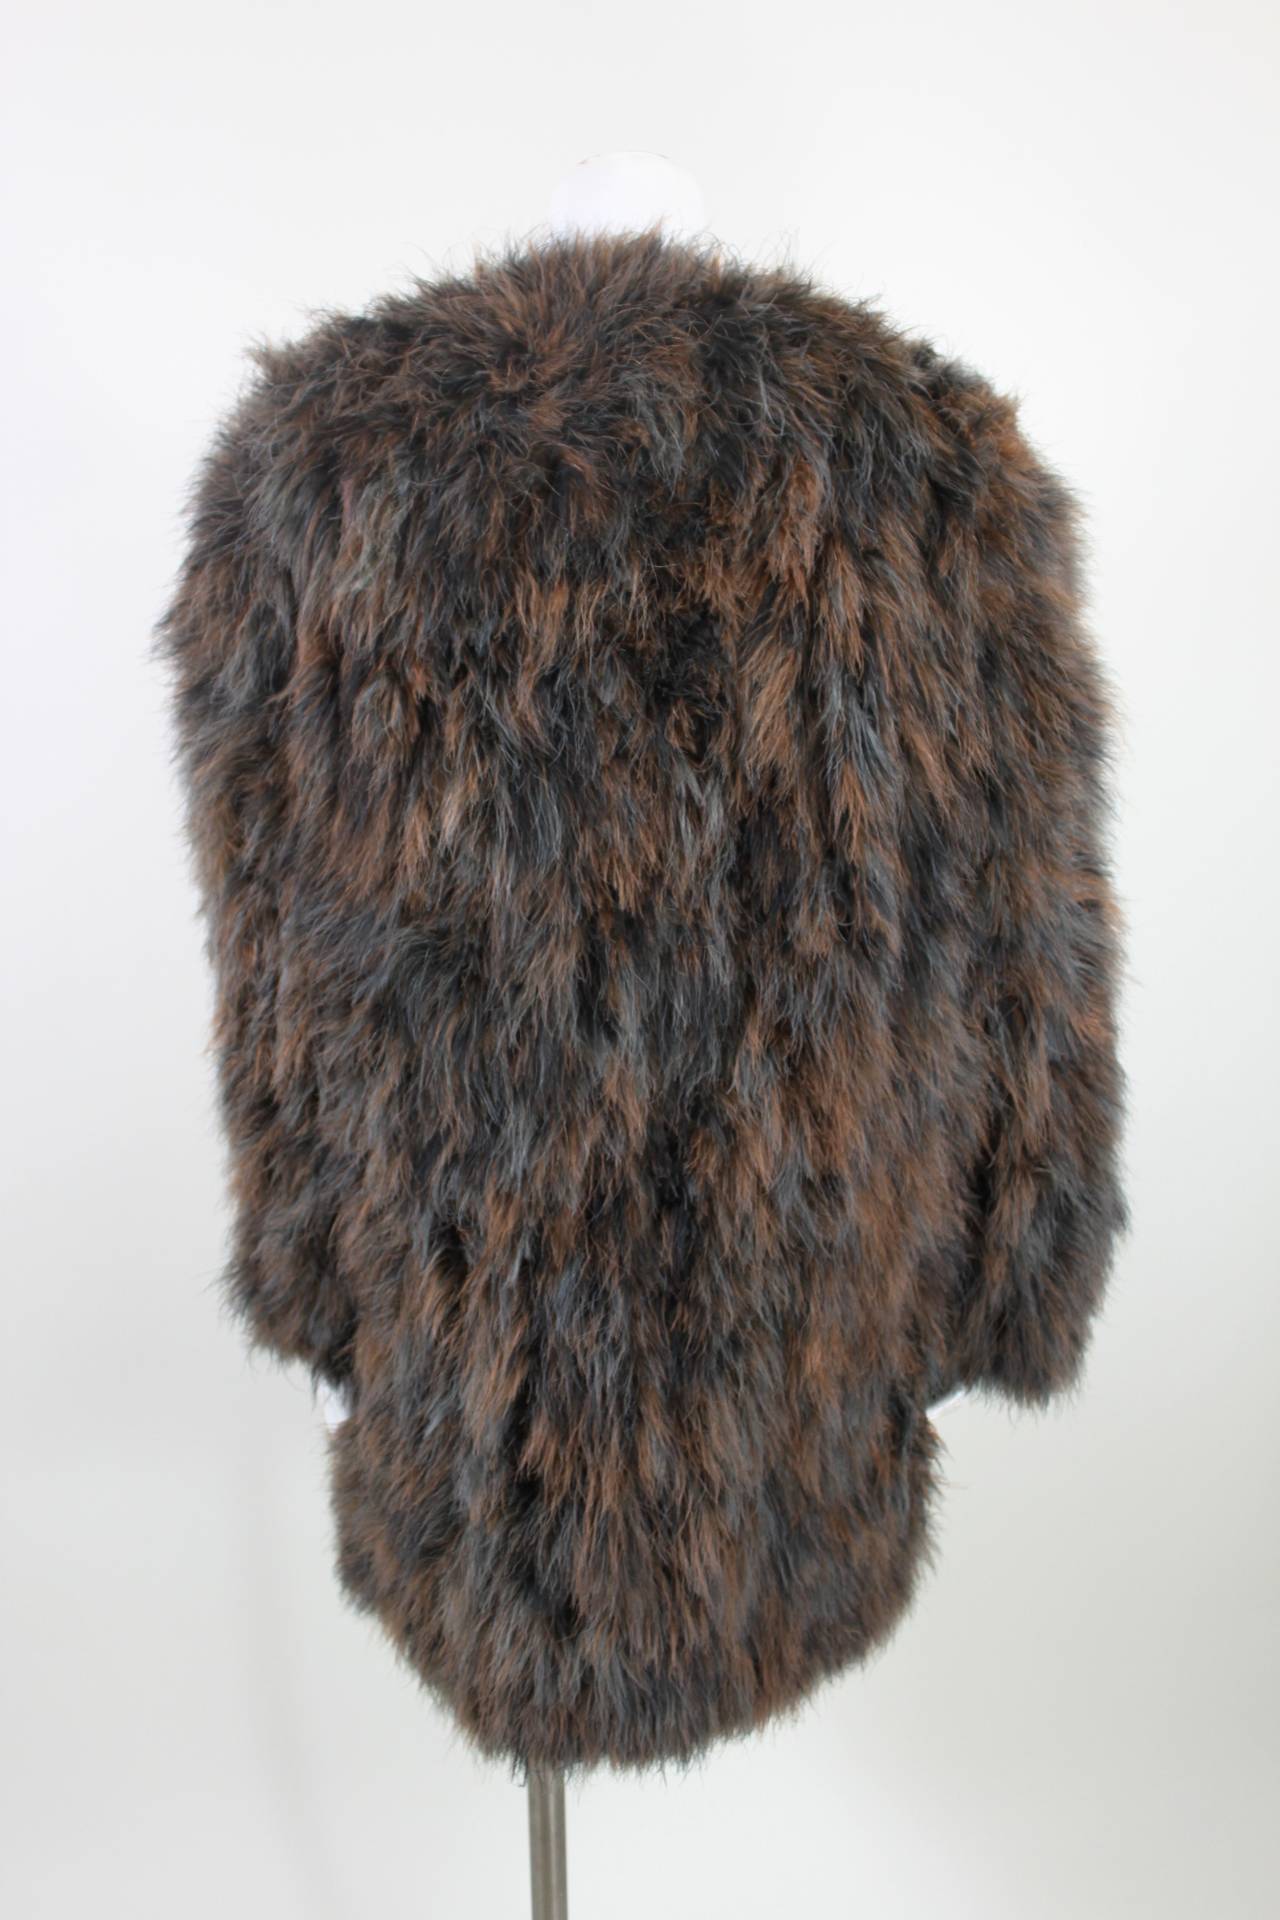 Women's Chantal Thomass 1980s Ice Grey and Brown Marabou Coat For Sale